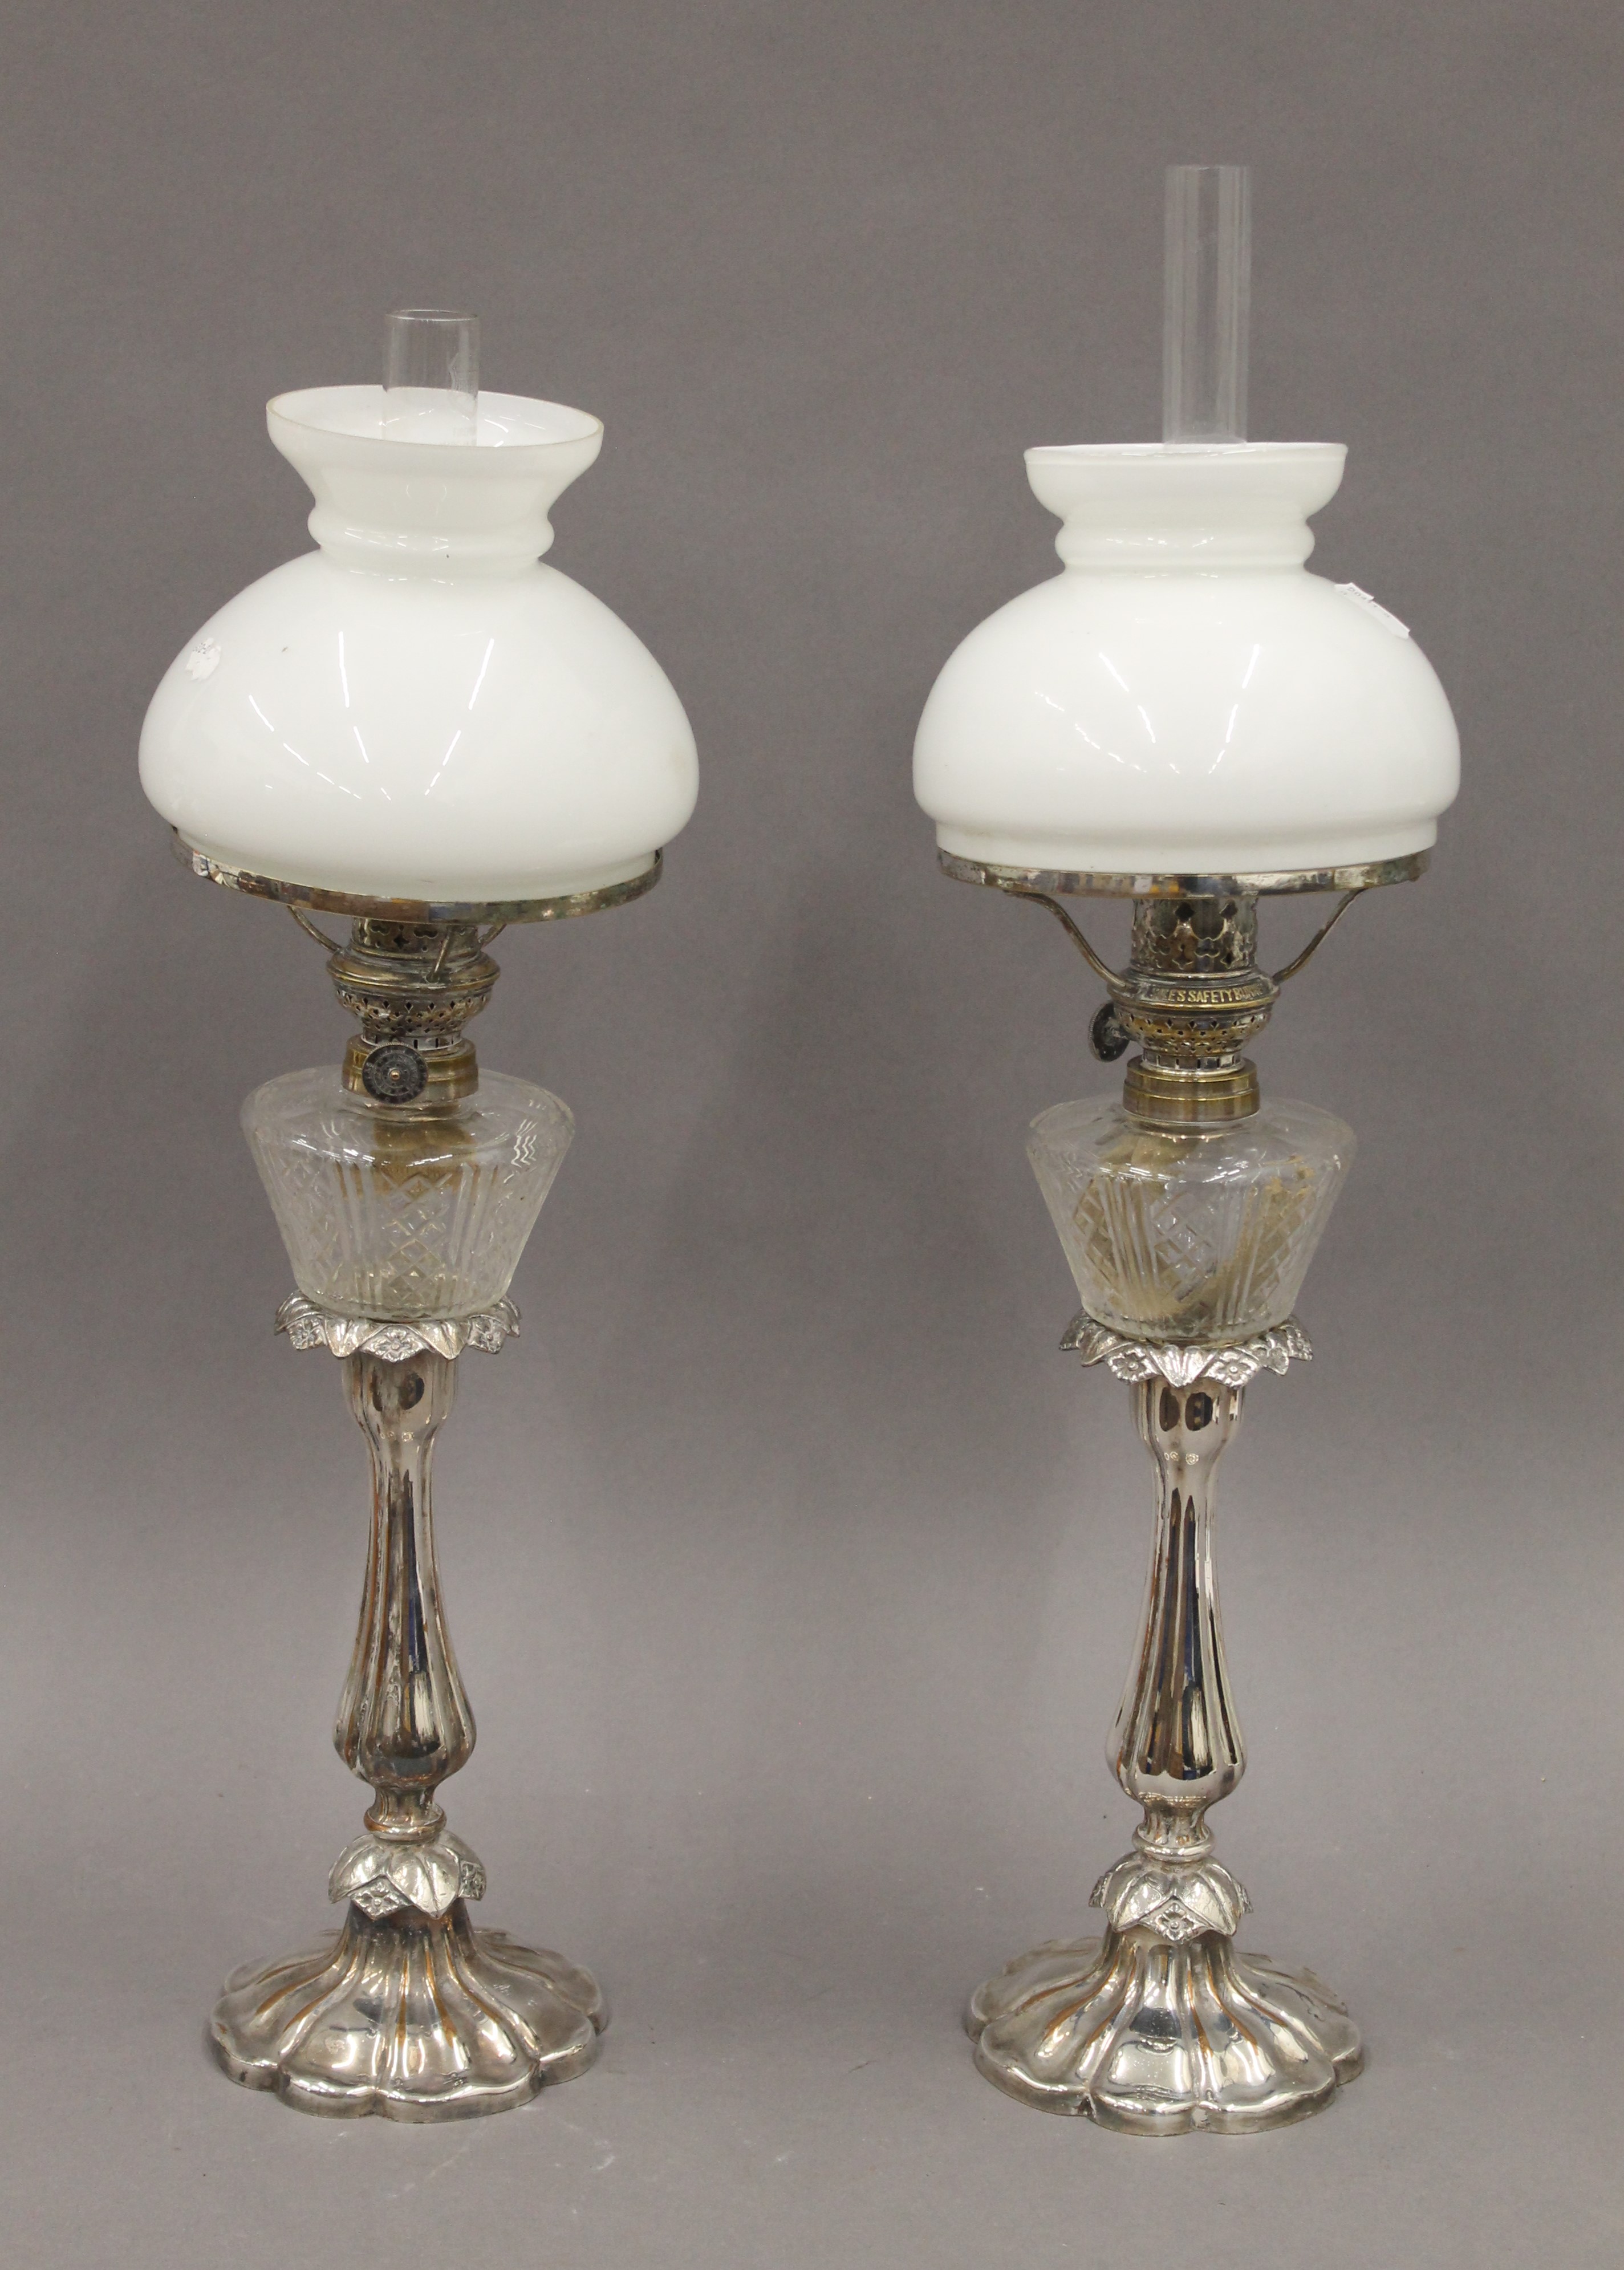 A pair of Victorian silver plated oil lamps, with cut glass reservoirs and opaline shades.